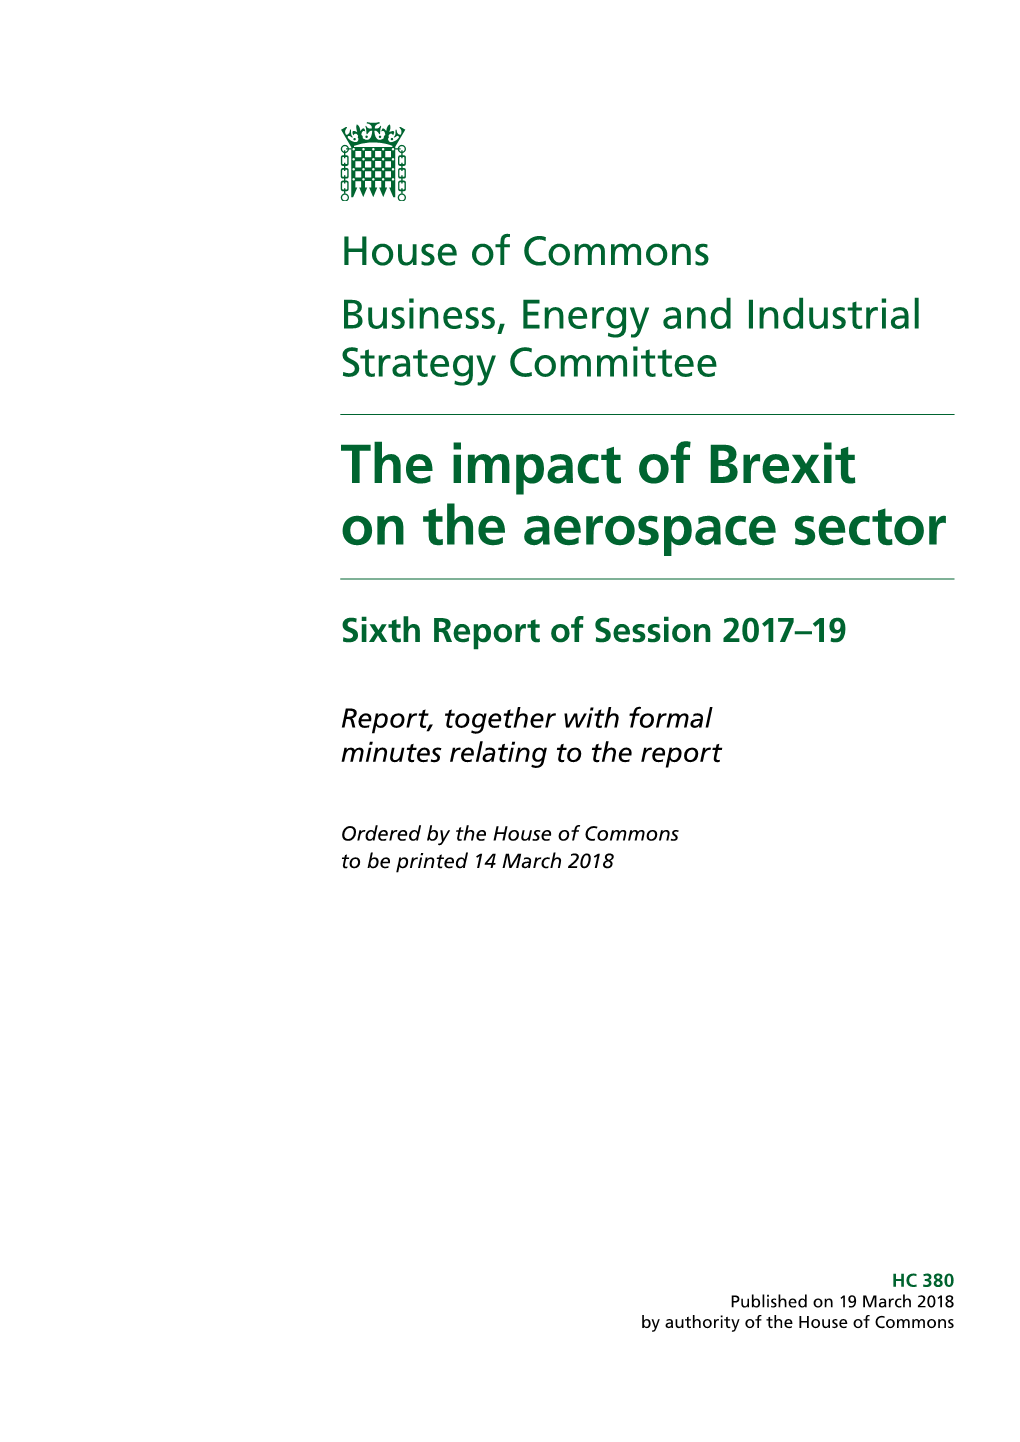 The Impact of Brexit on the Aerospace Sector